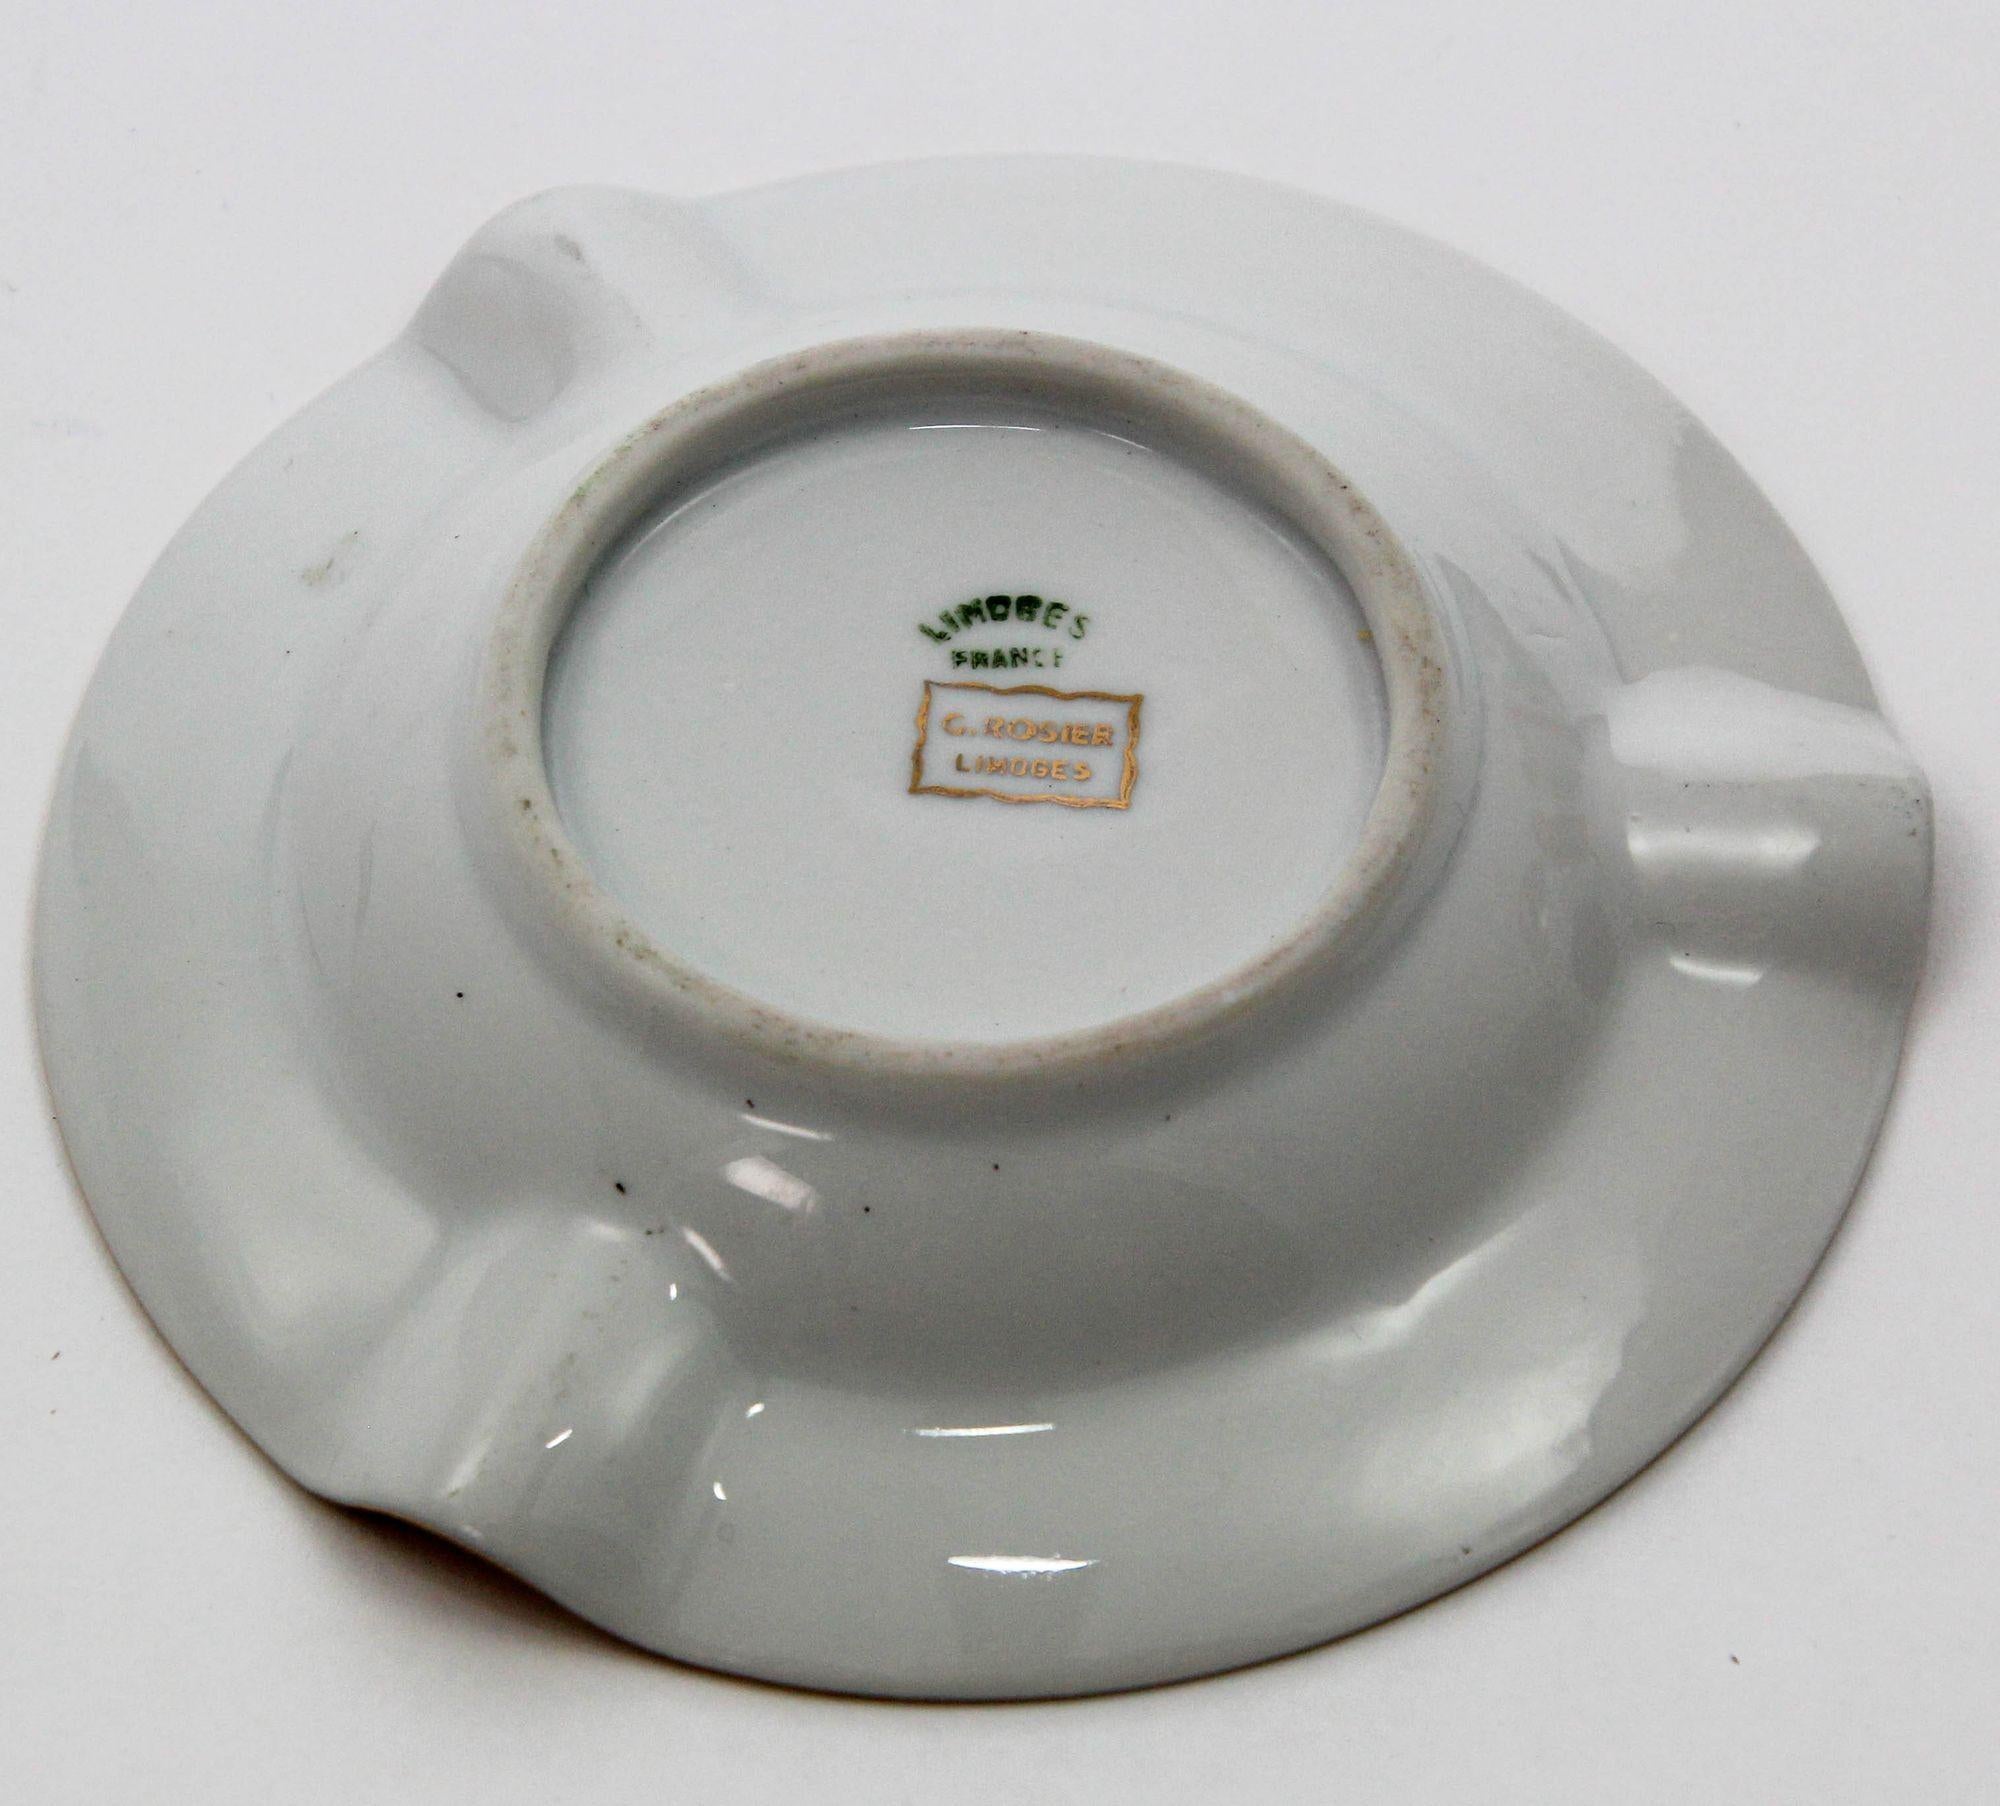 Hand-Crafted Limoges Porcelain Ashtray Mont Saint Michel Hand-Painted Dish France 1960s For Sale